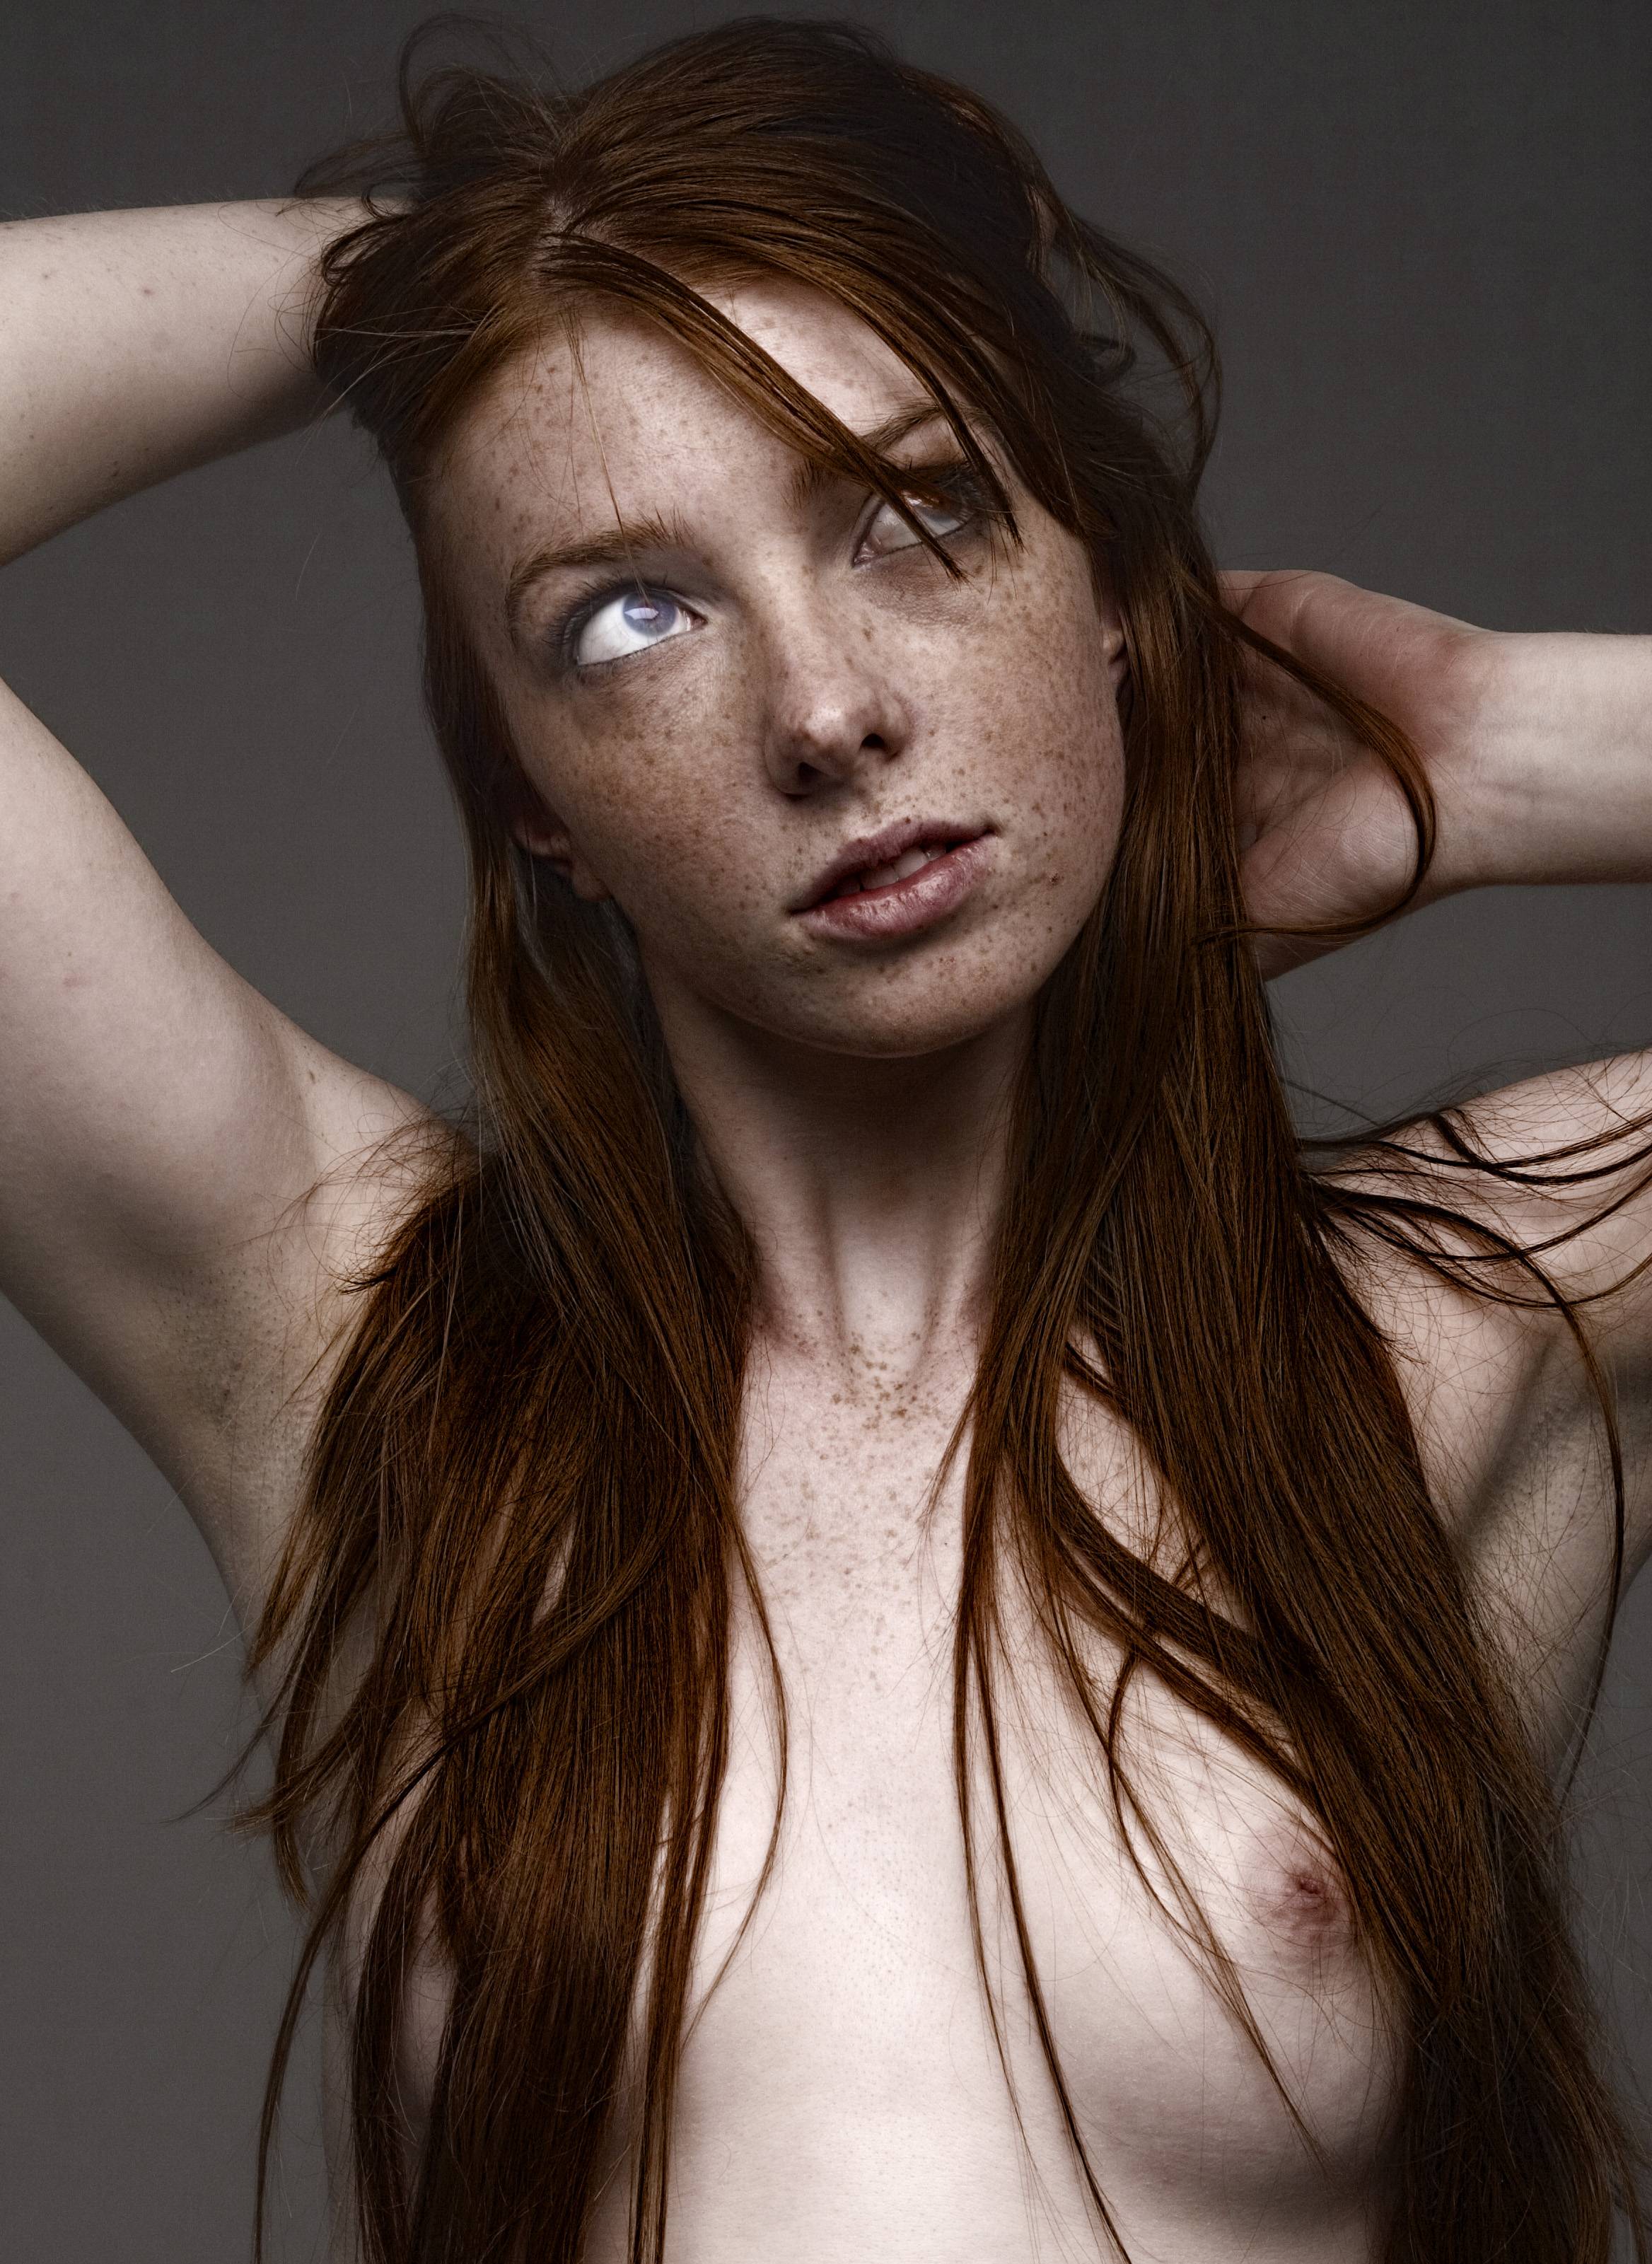 Naked with freckles